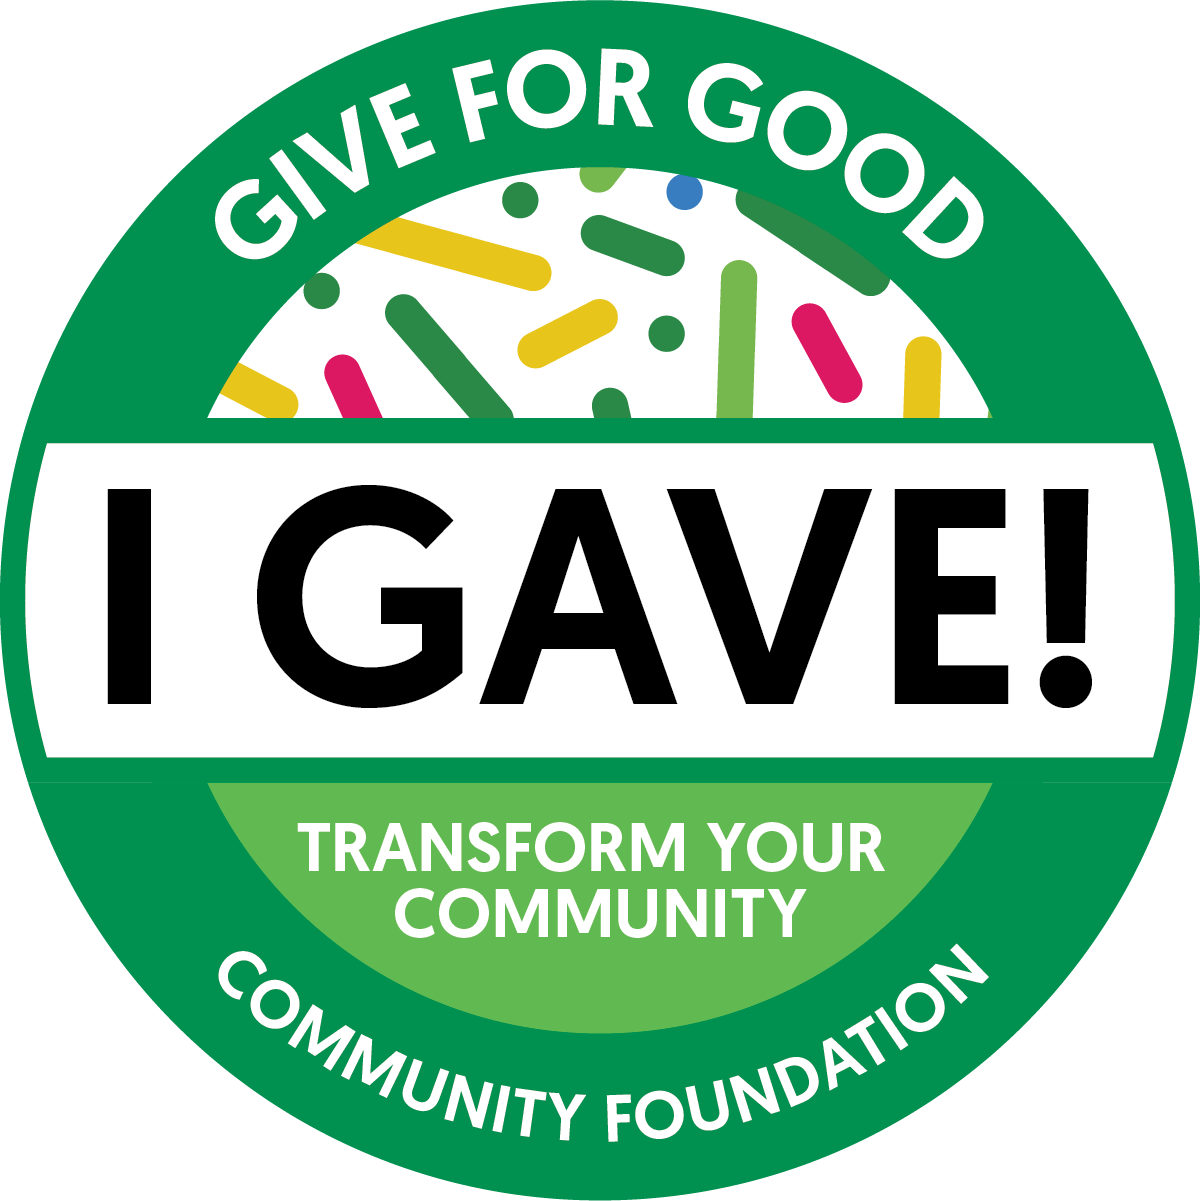 Featured image for “Give for Good”